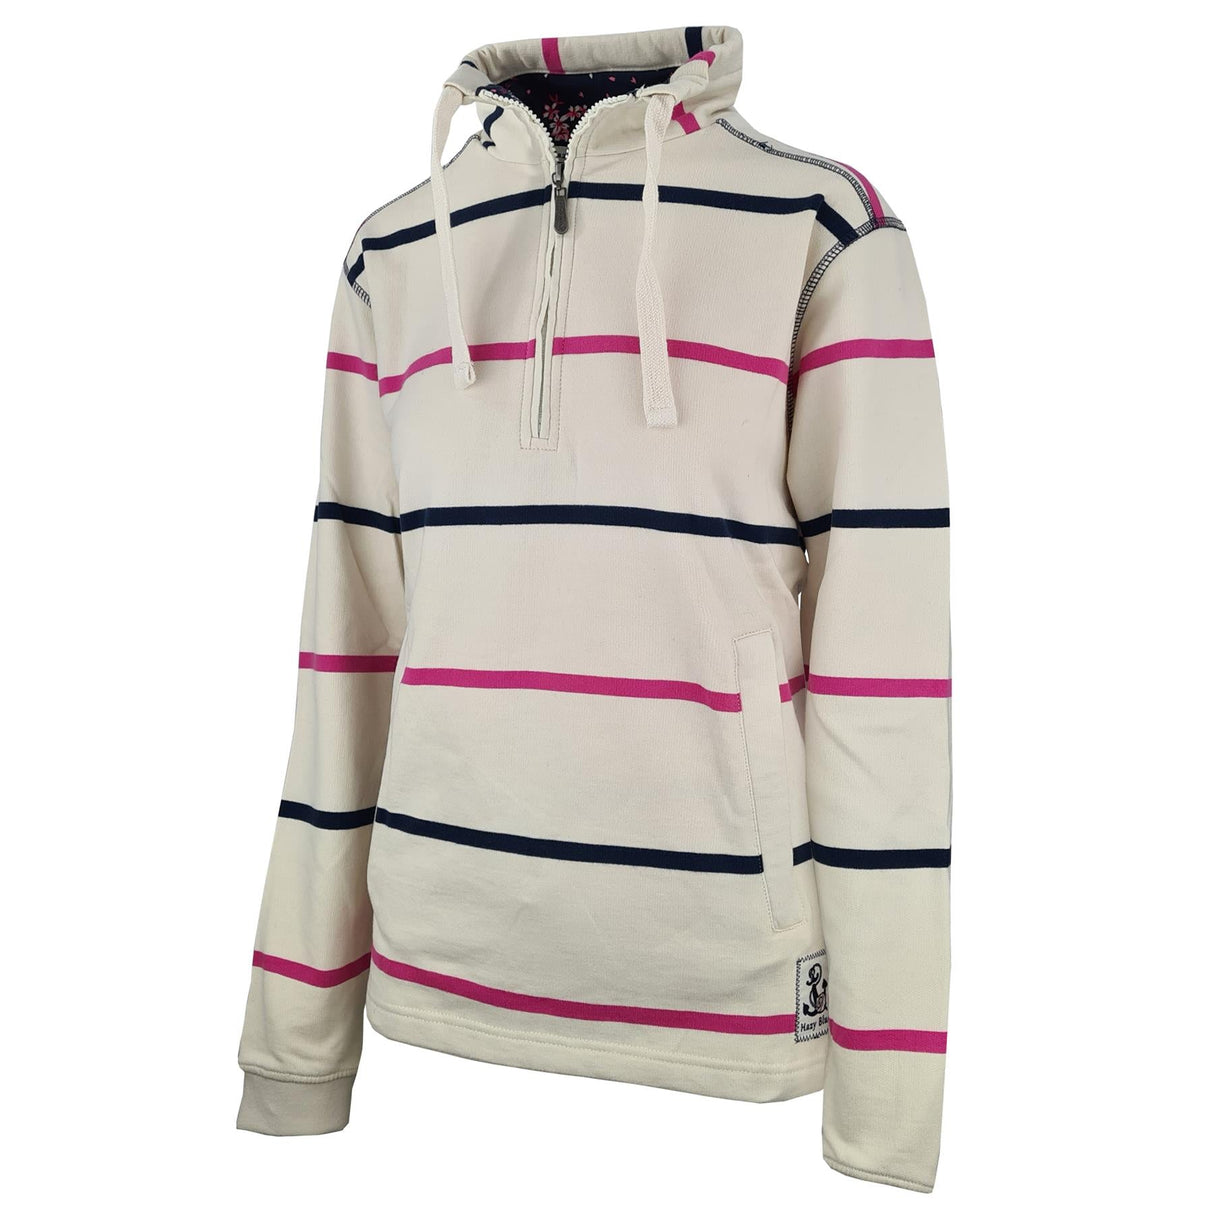 Lizzy Womens Half Zip Pullover Sweatshirt Top Striped - Premium clothing from Hazy Blue - Just $29.99! Shop now at Warwickshire Clothing